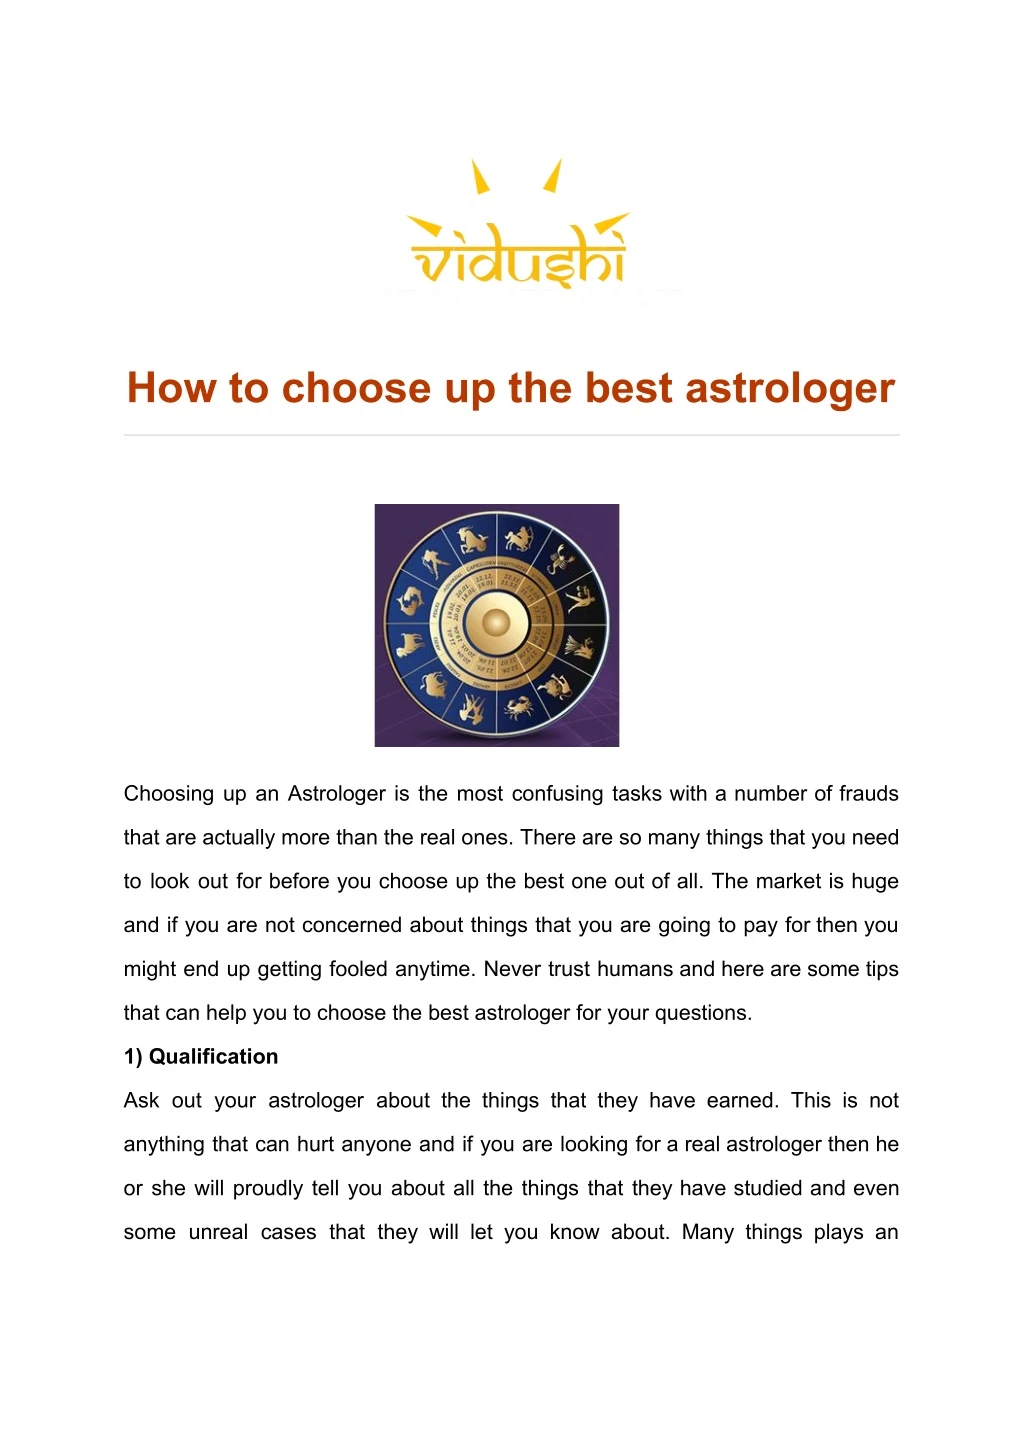 how to choose up the best astrologer